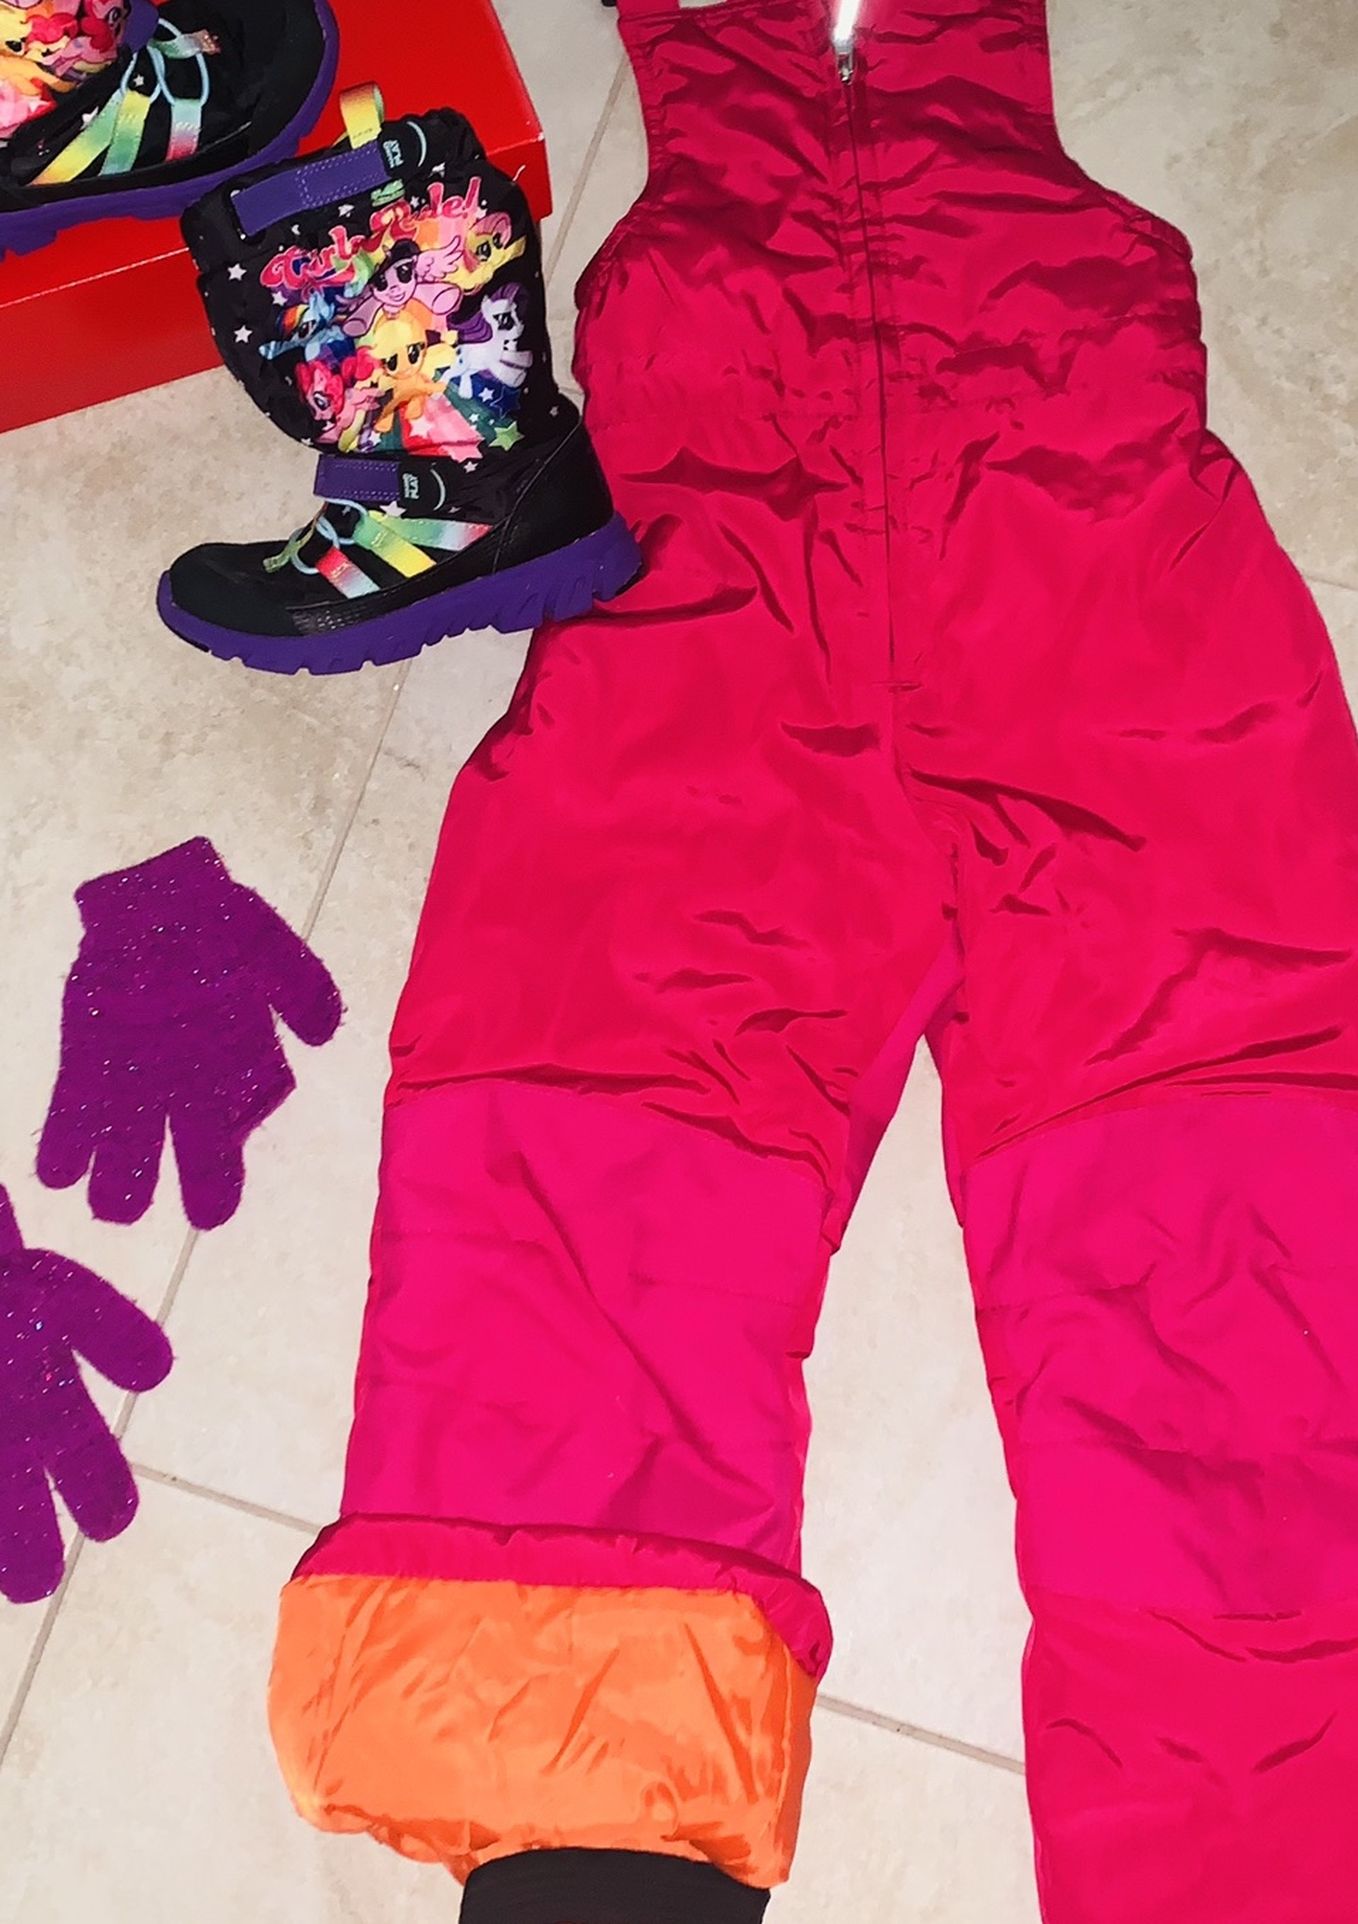 Snow Suit For 5-7 Year Old Girl